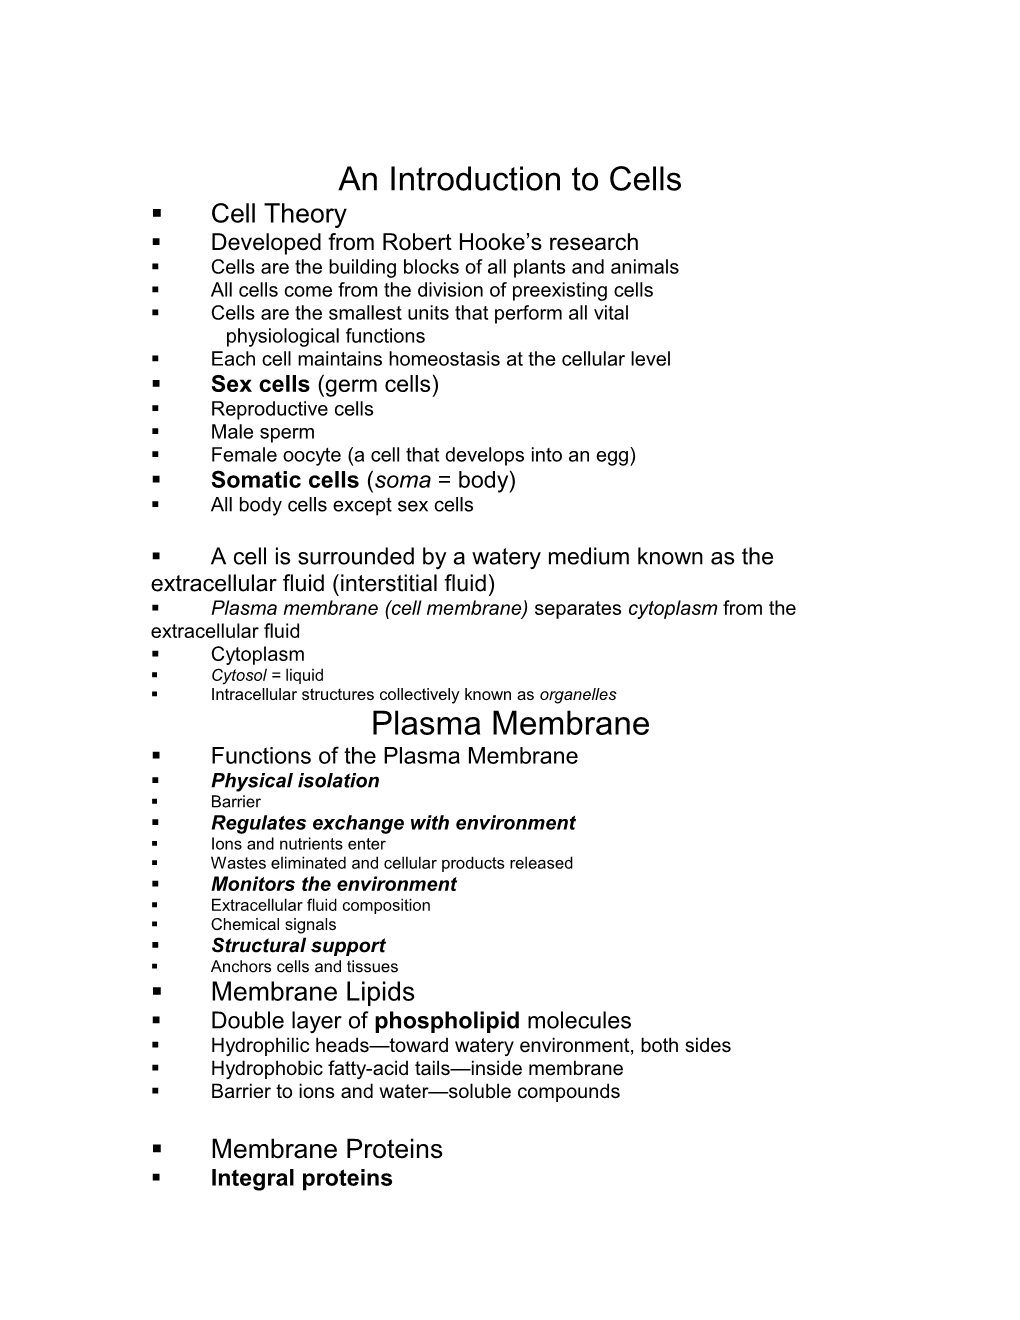 An Introduction to Cells